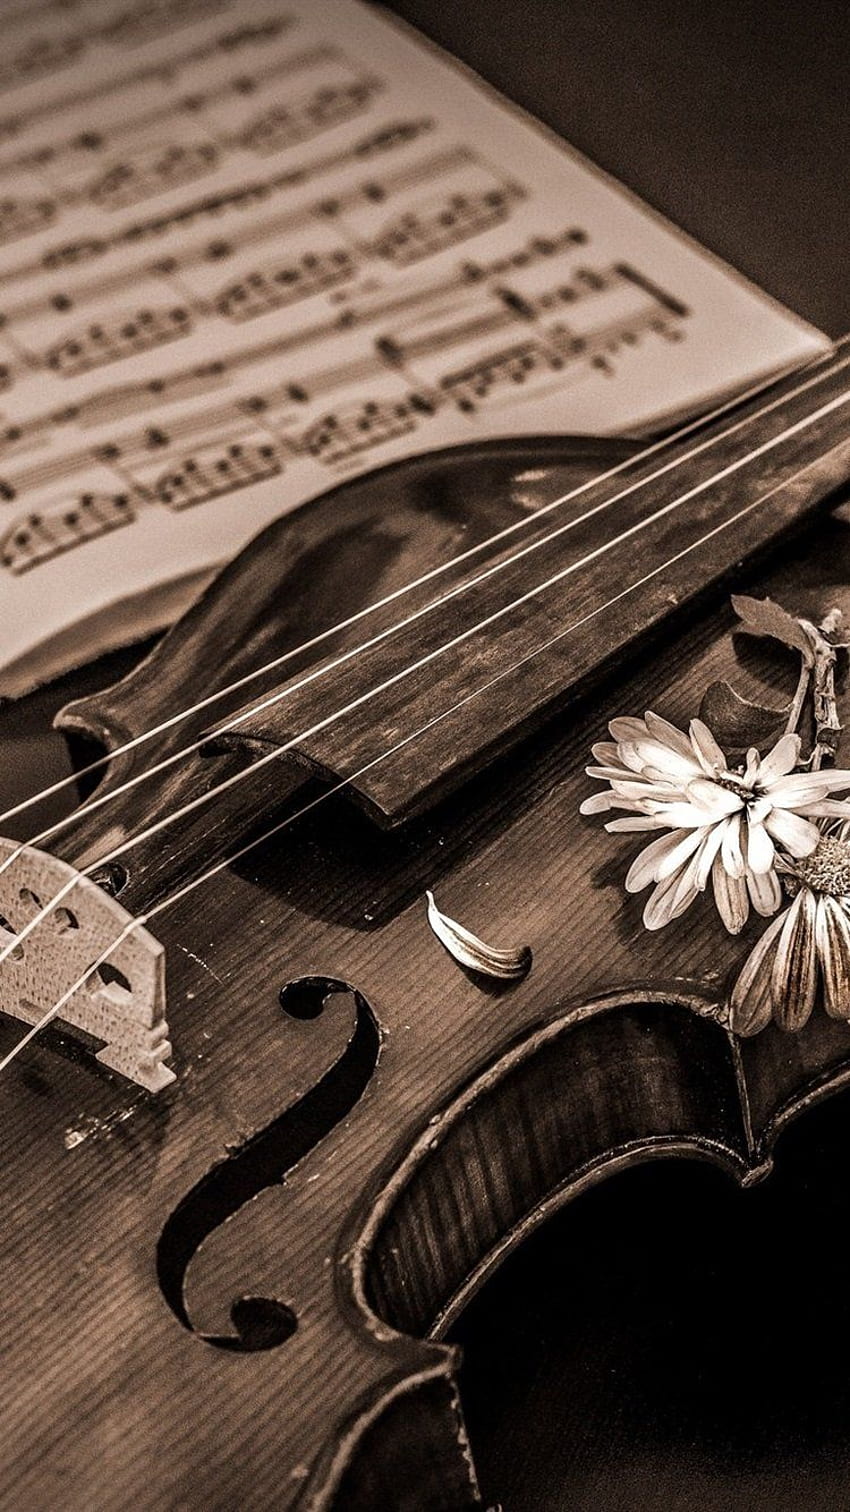 Download Strumming the Strings of a Classic Violin Wallpaper | Wallpapers .com